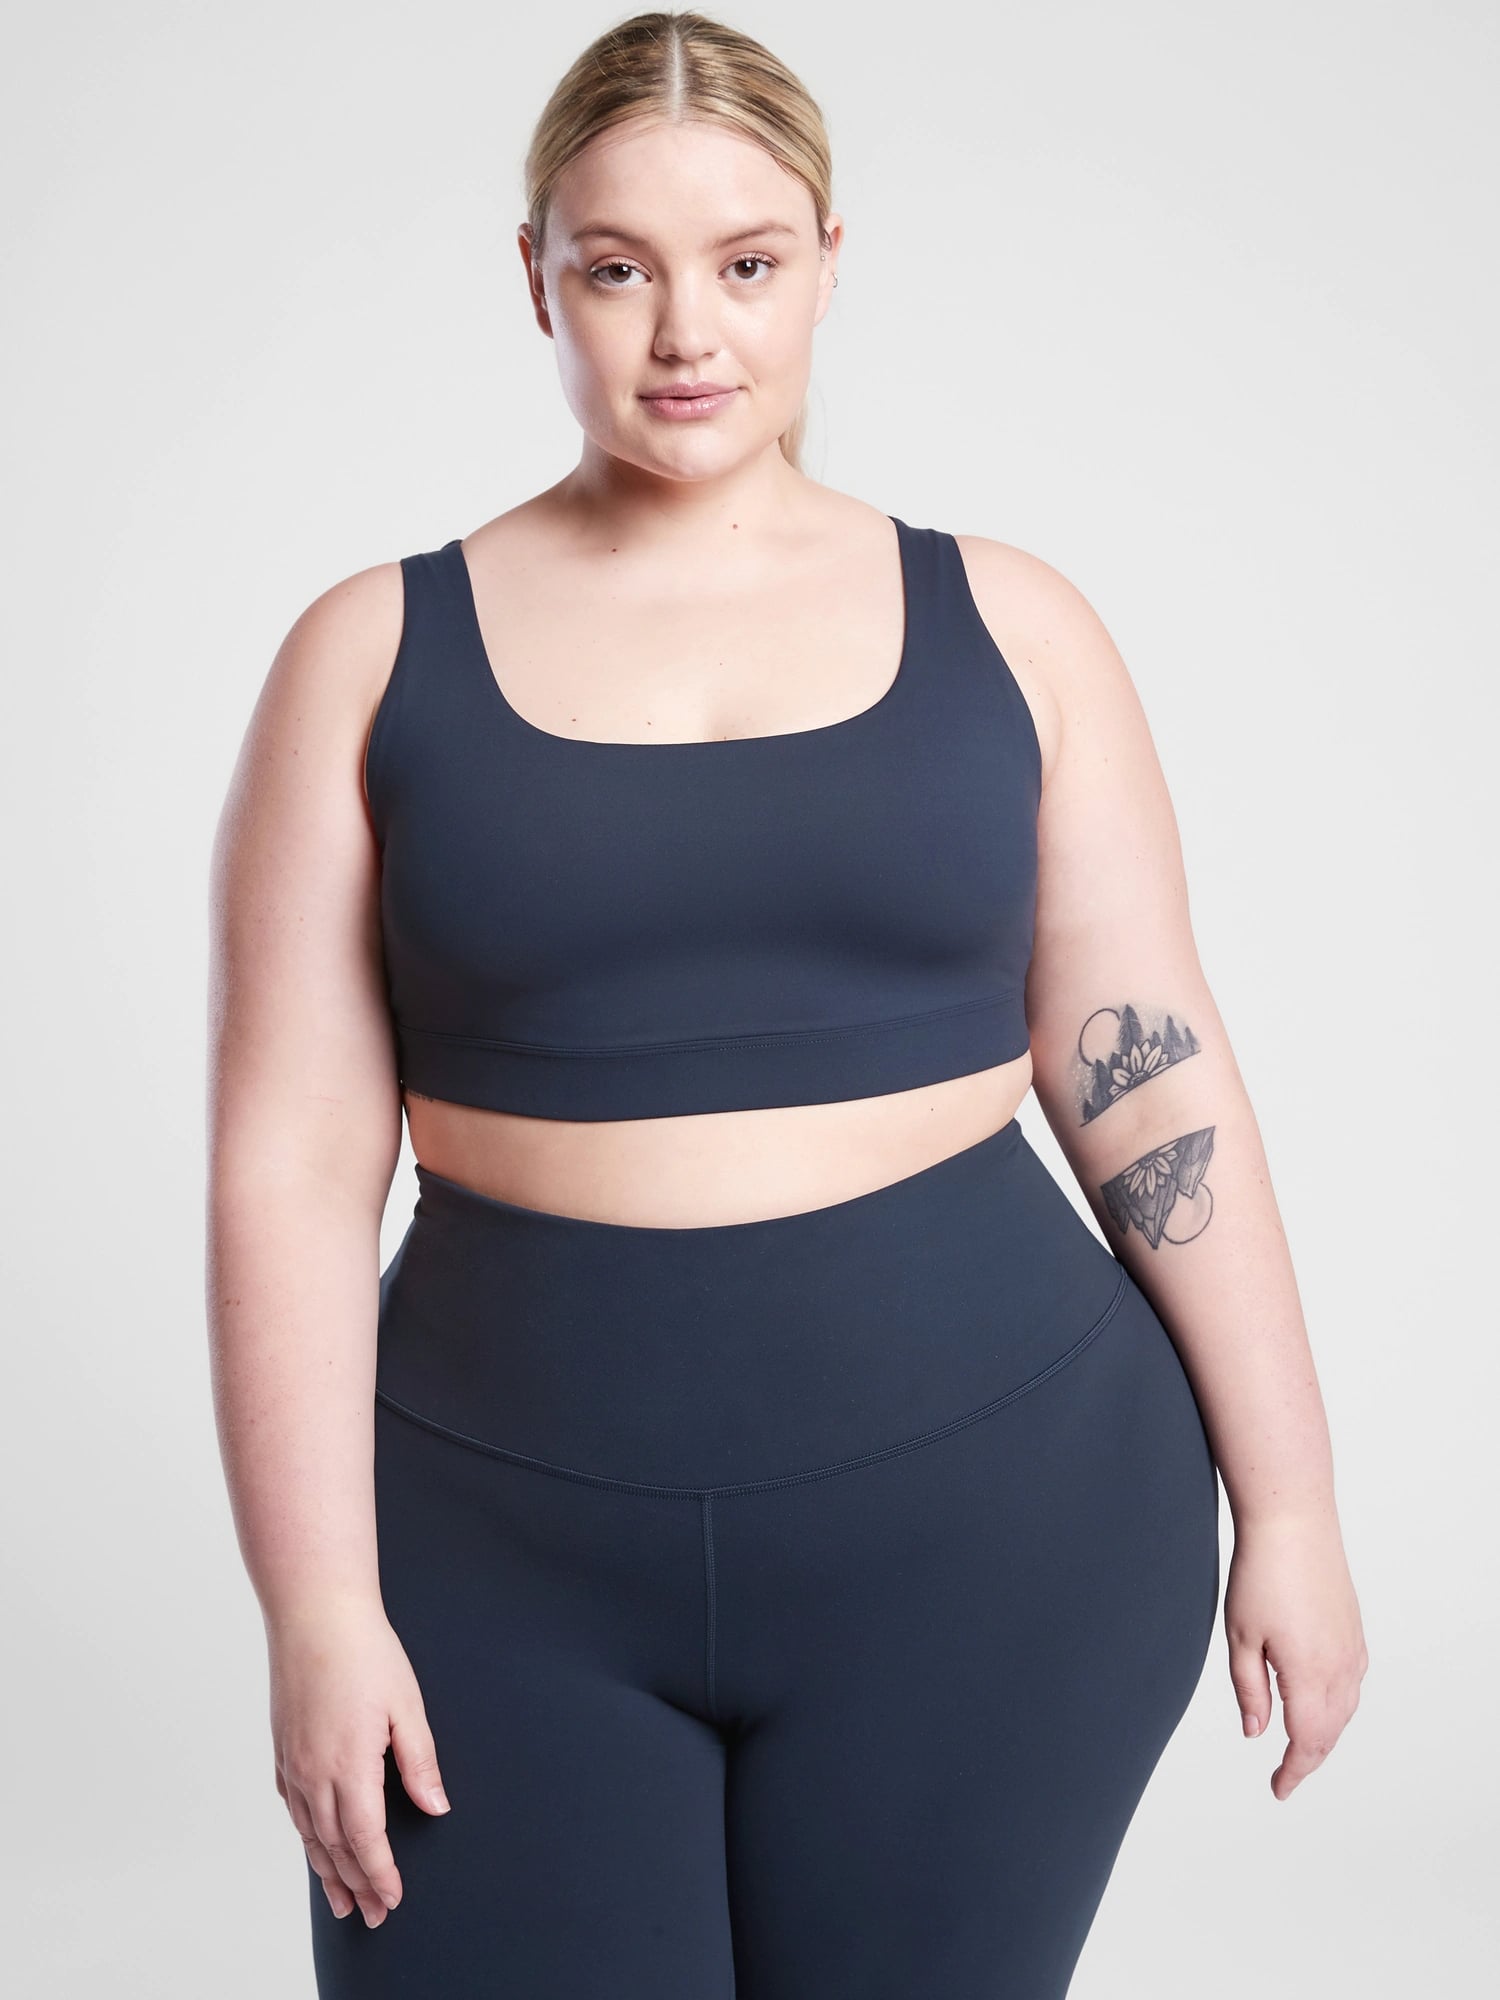 A High Impact Set: Athleta Exhale Bra D-DD+ and Salutation Stash Pocket II  Tight, 10 Size-Inclusive Workout Sets Worth Investing In This Spring